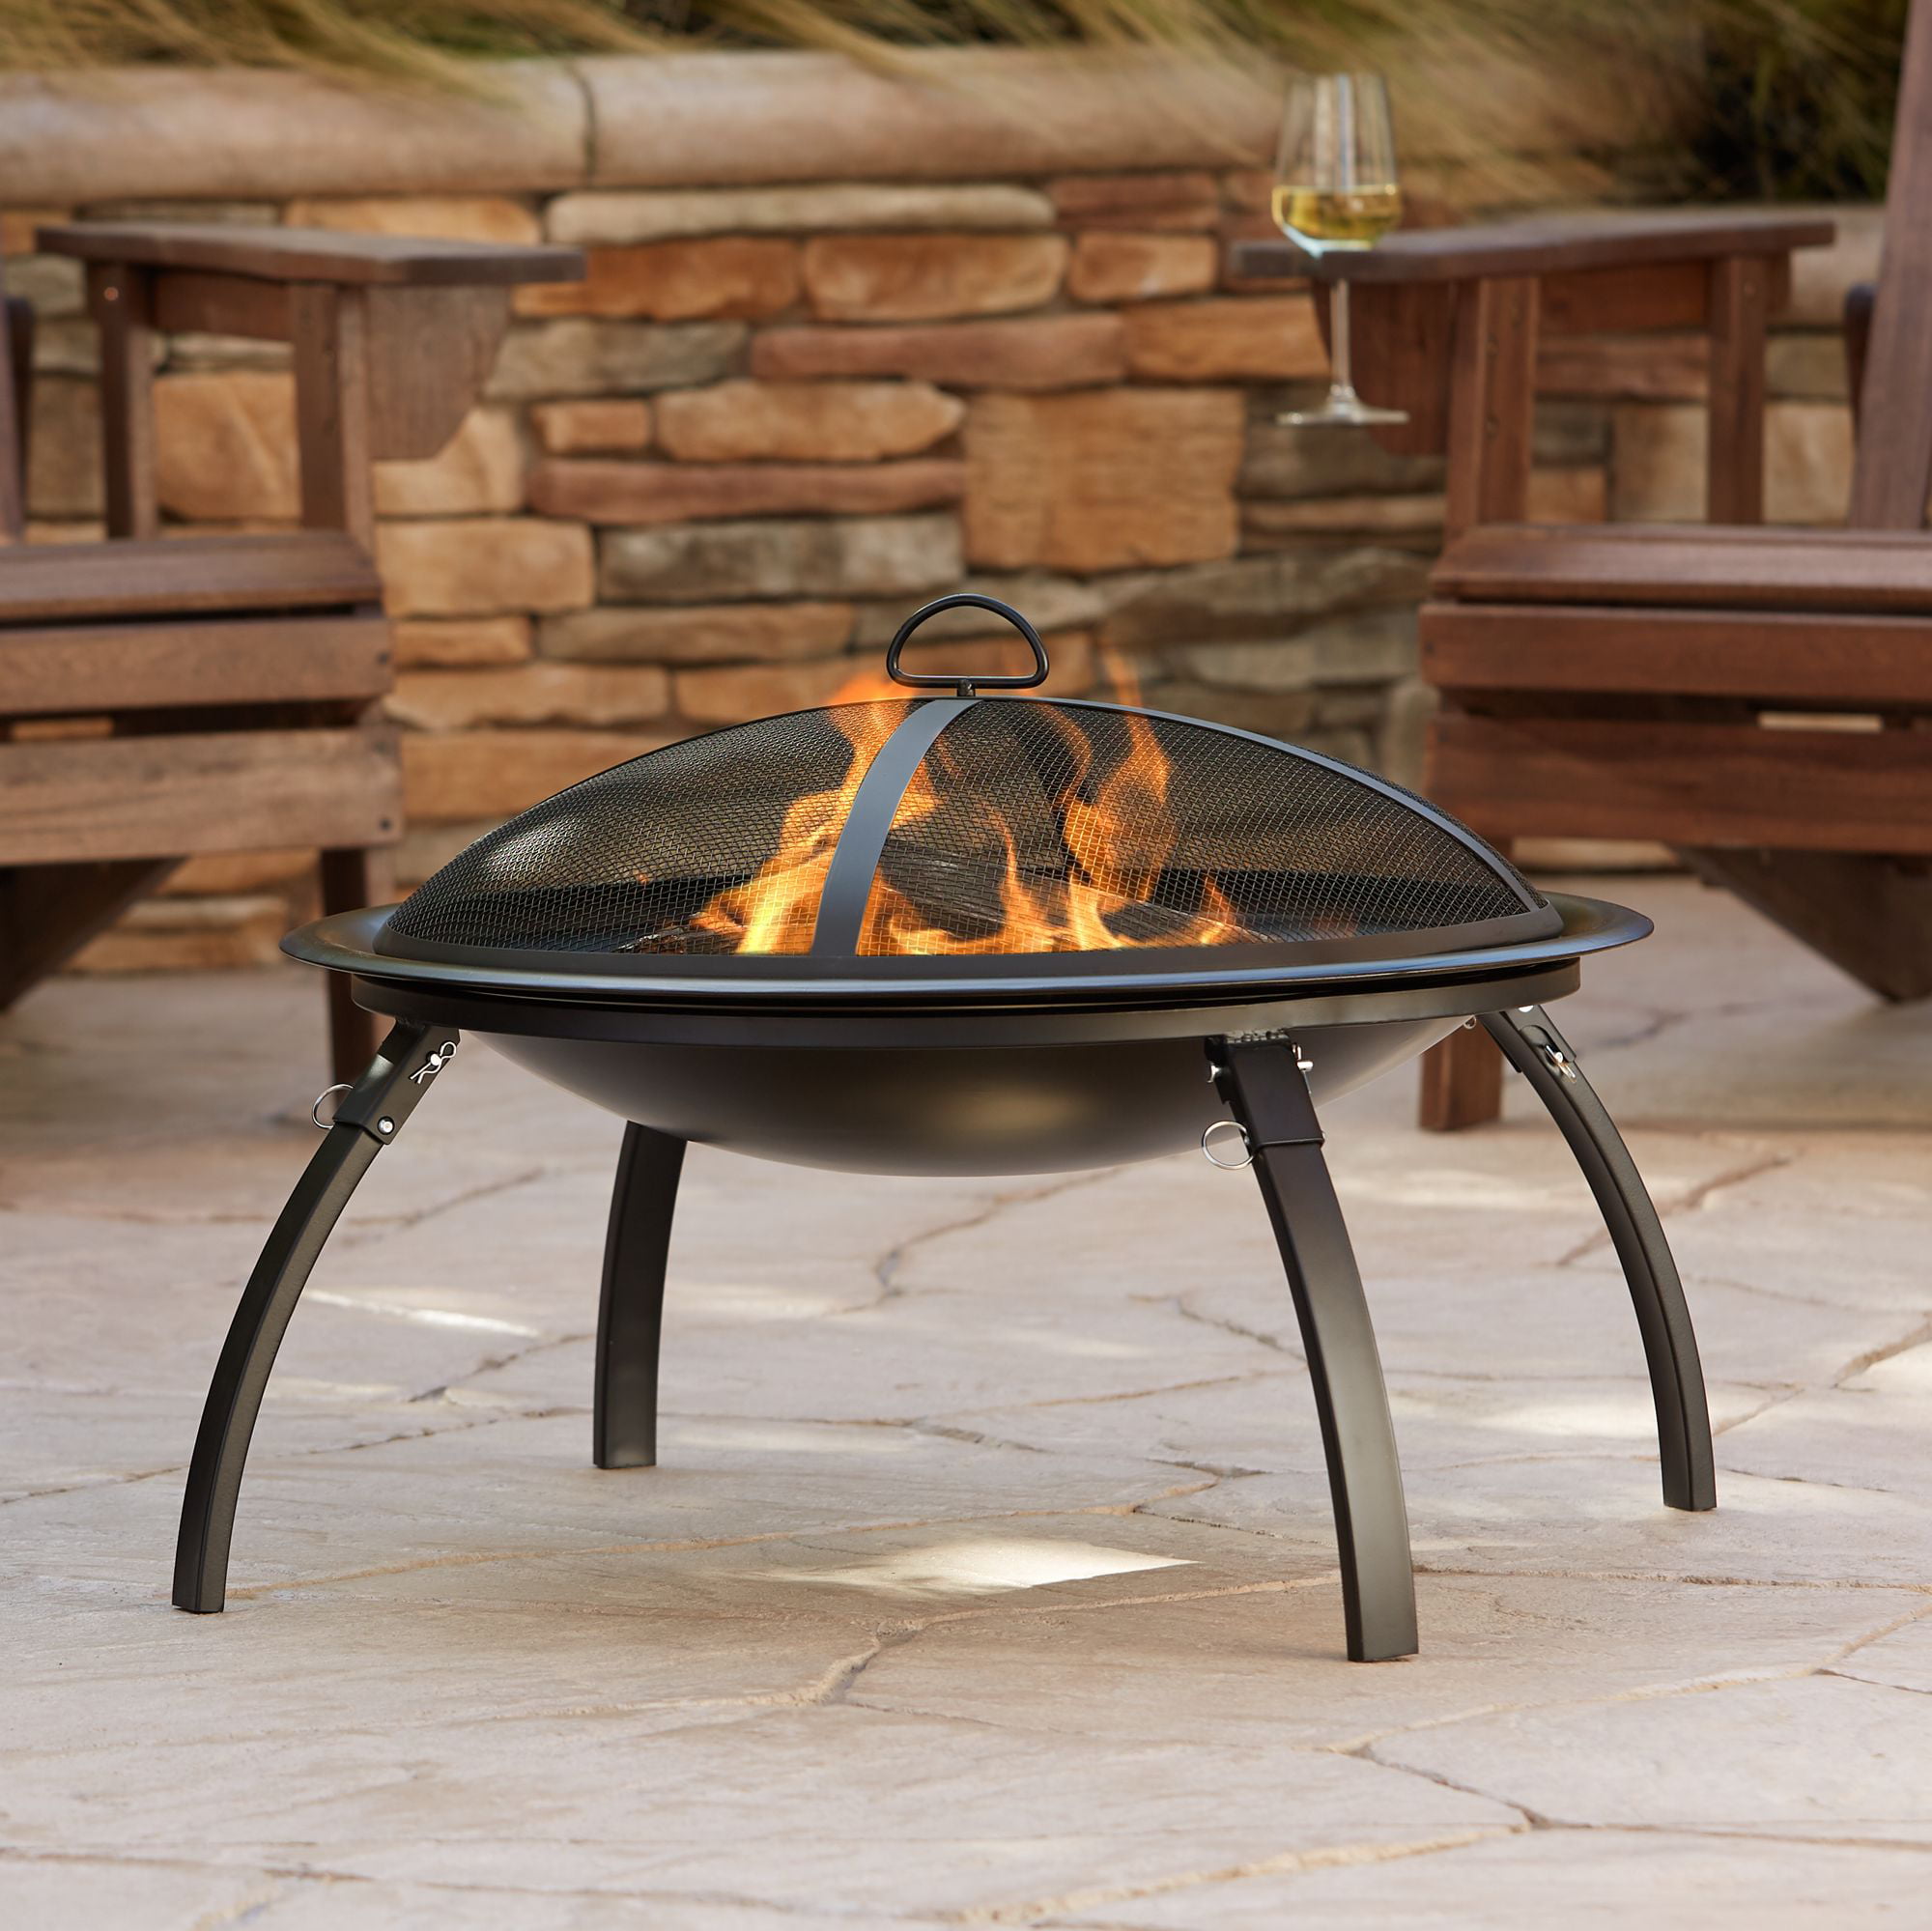 Portable Foldable Outdoor Firepit Fireplace 22 Inch Foldable Garden Camping Heat 